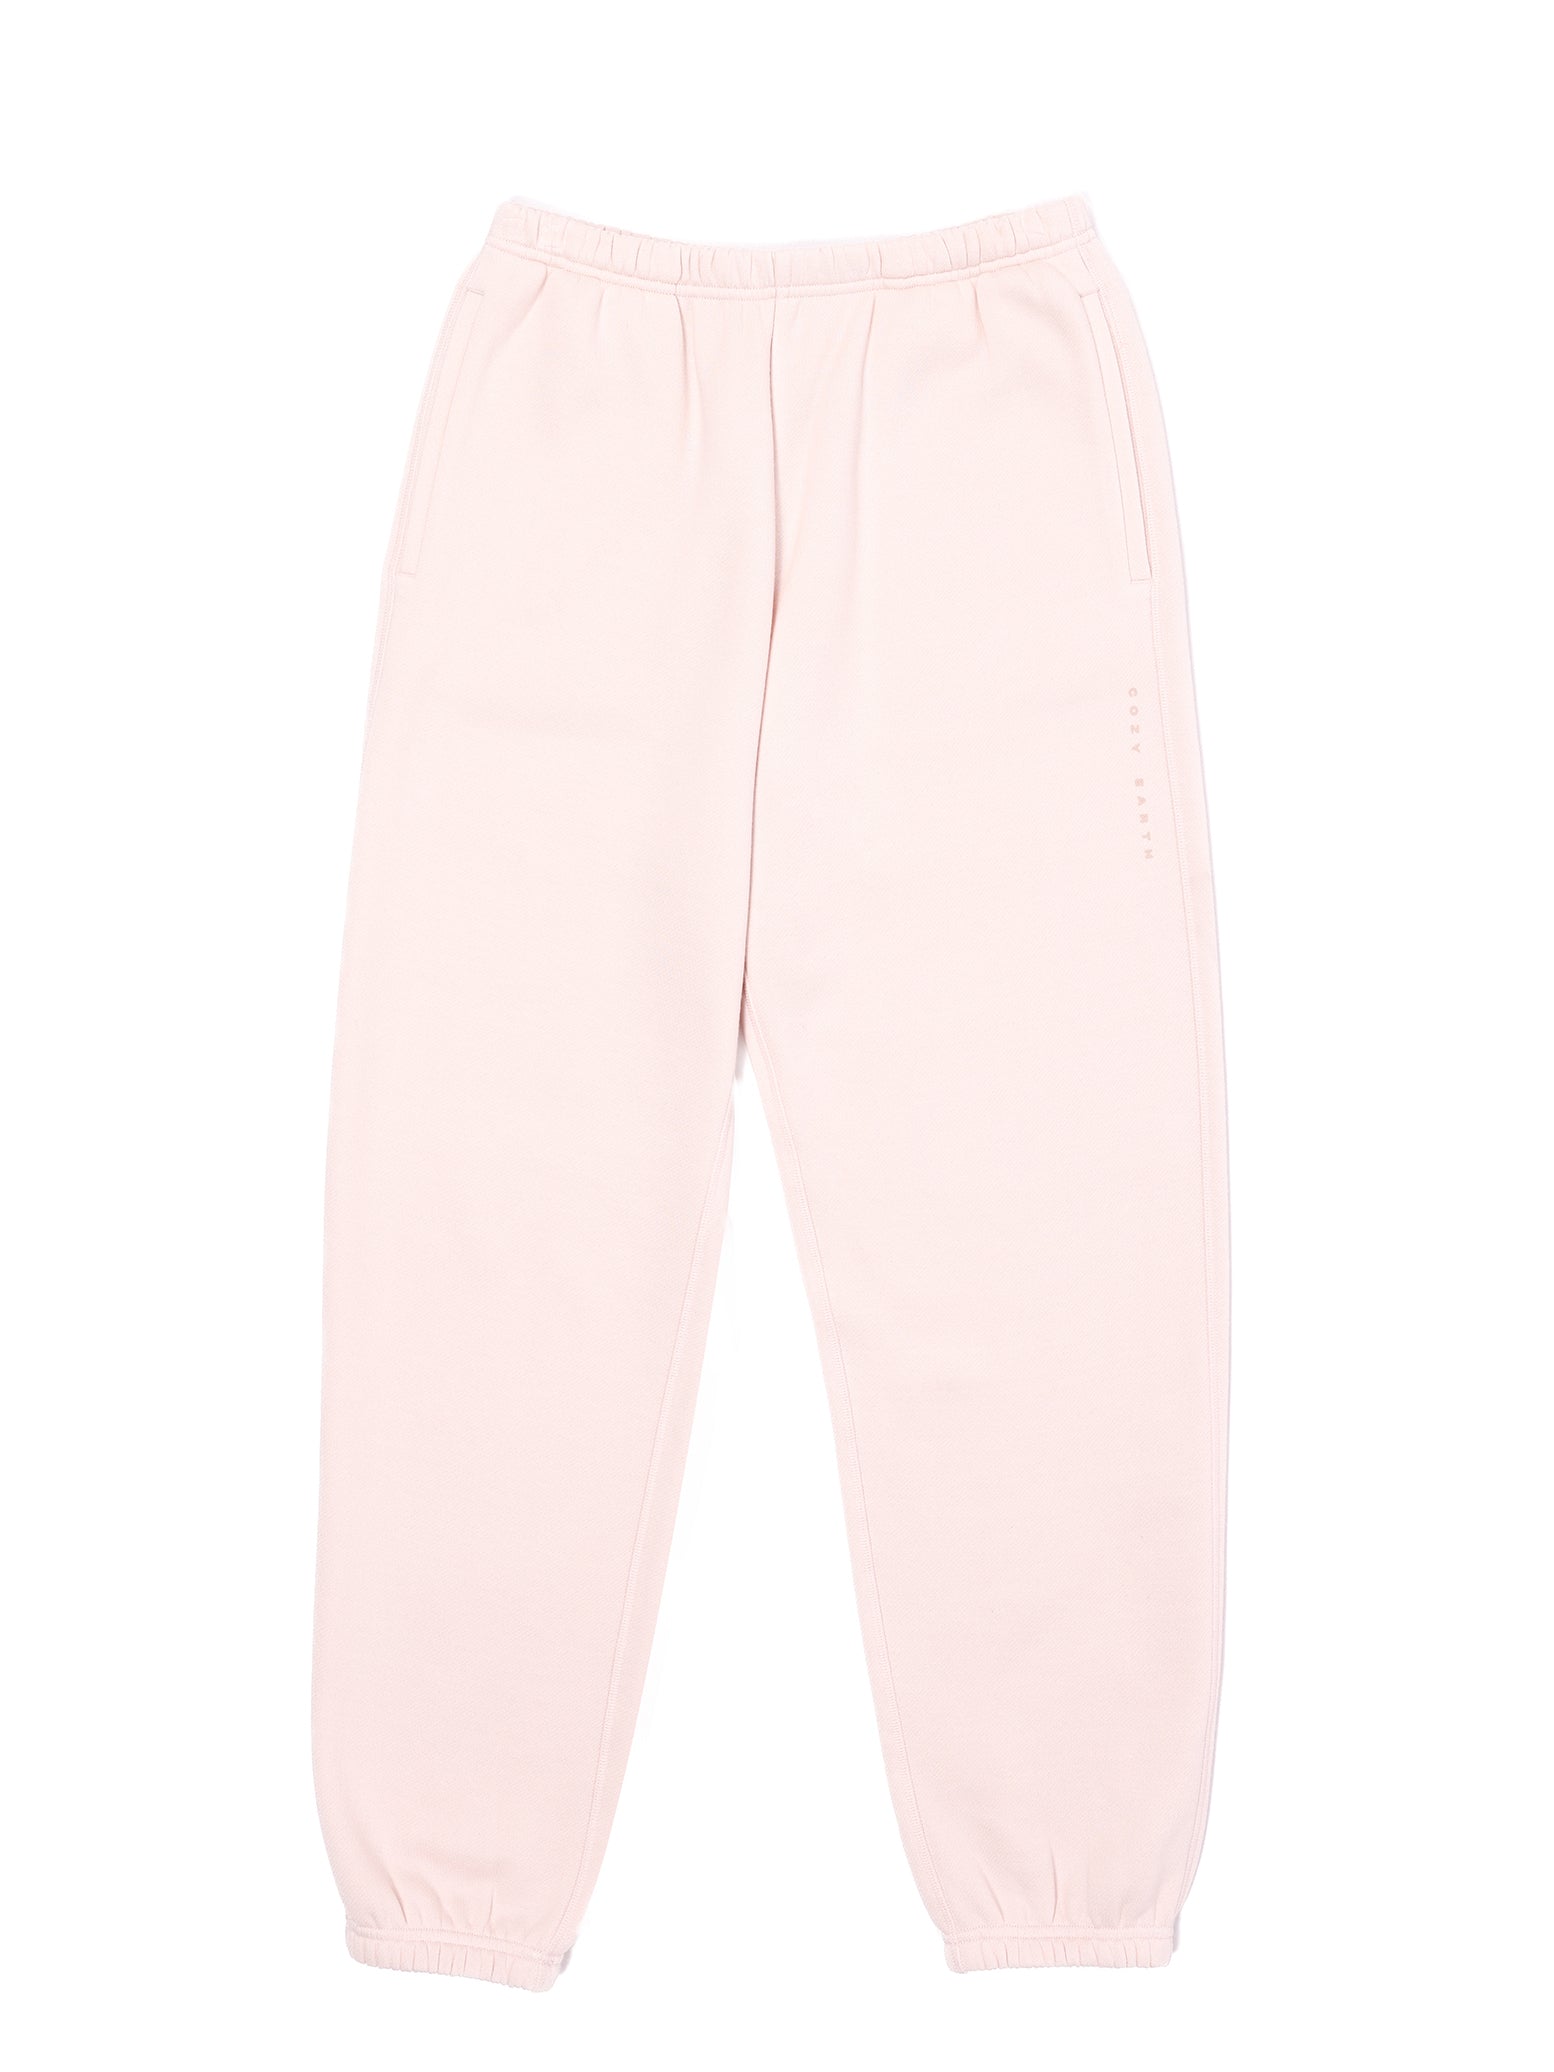 Peony CityScape Joggers. The Joggers are laying flat over a white background. 